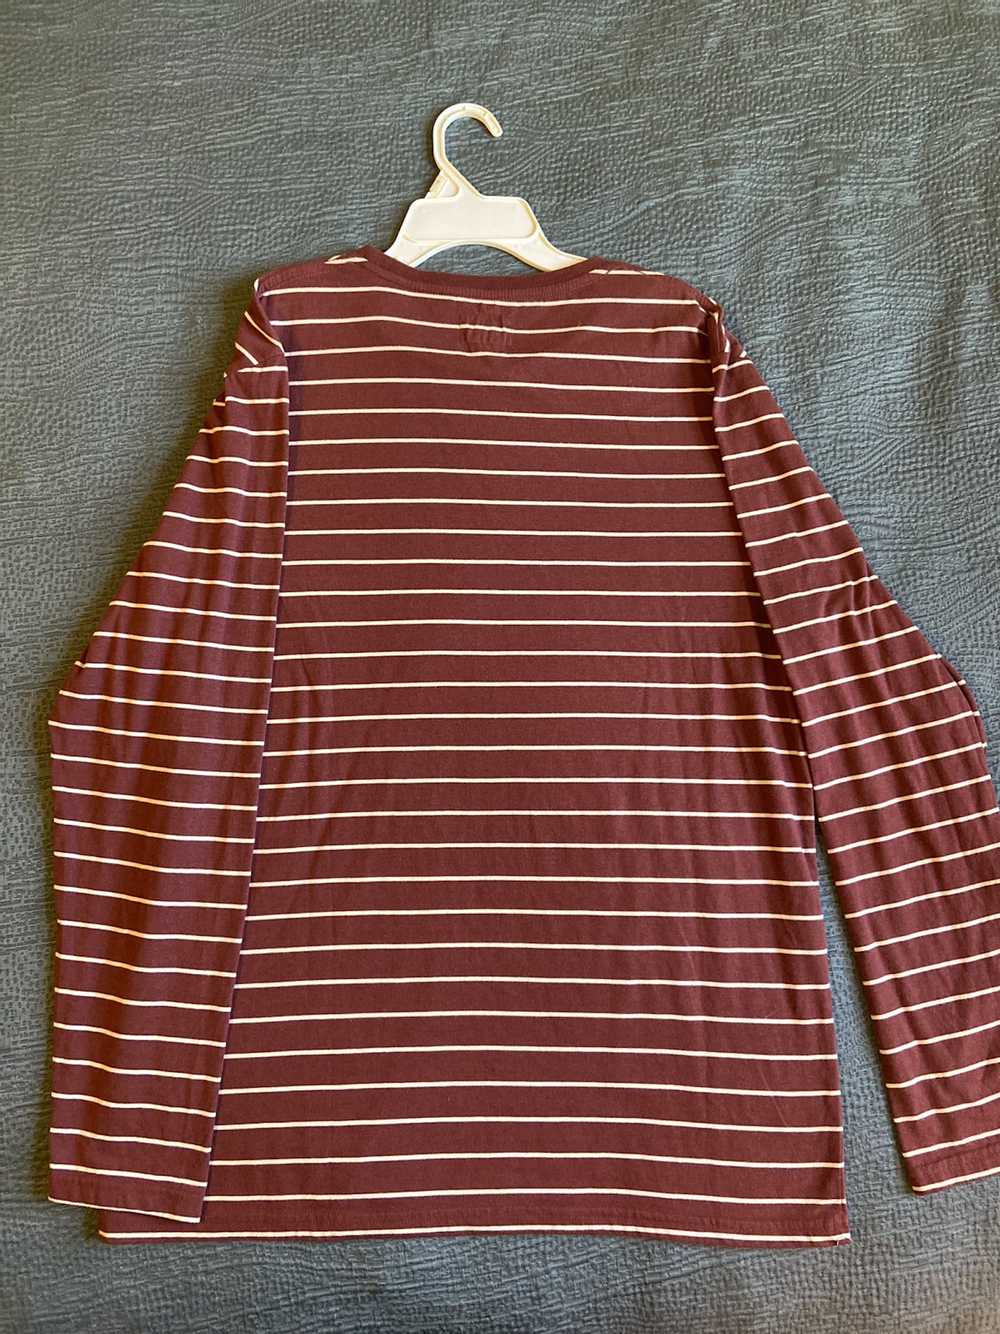 Captain Fin& Co. Striped Long Sleeve Tee - image 3